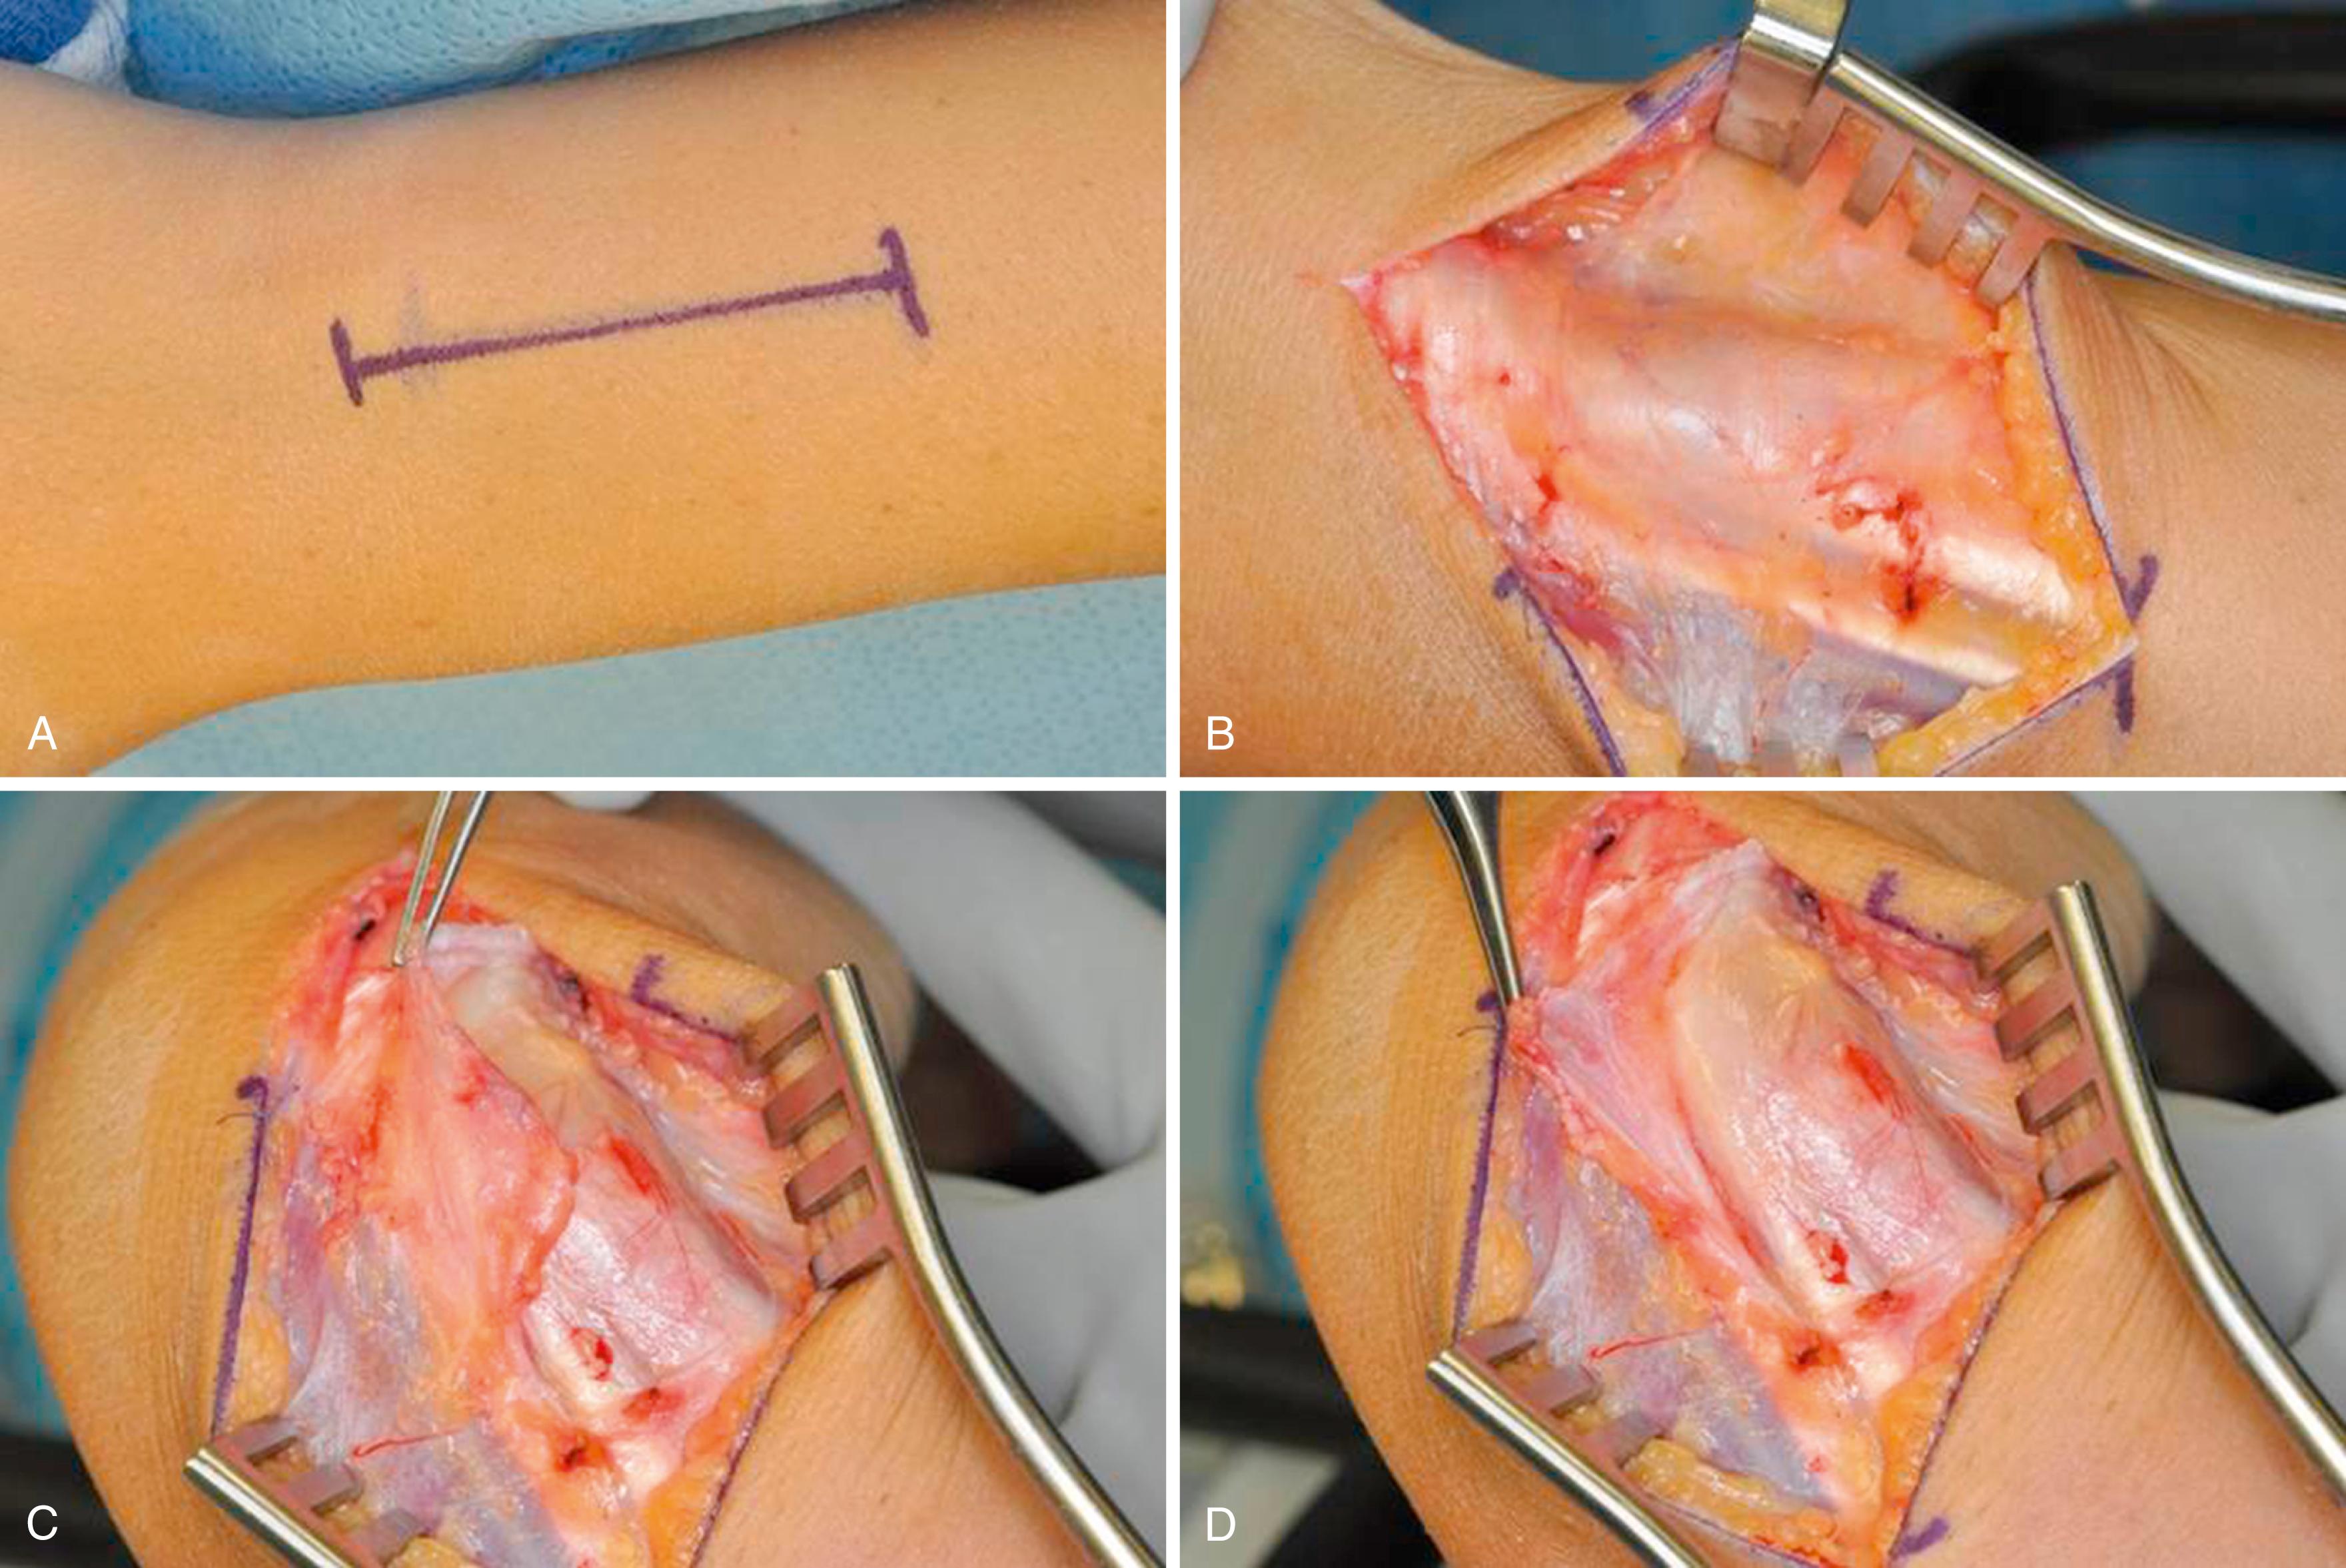 eFig. 14.3, A to D, 5-cm dorsoulnar incision; retinaculum incised and reflected radialward to expose extensor carpi ulnaris subsheath and ulna.